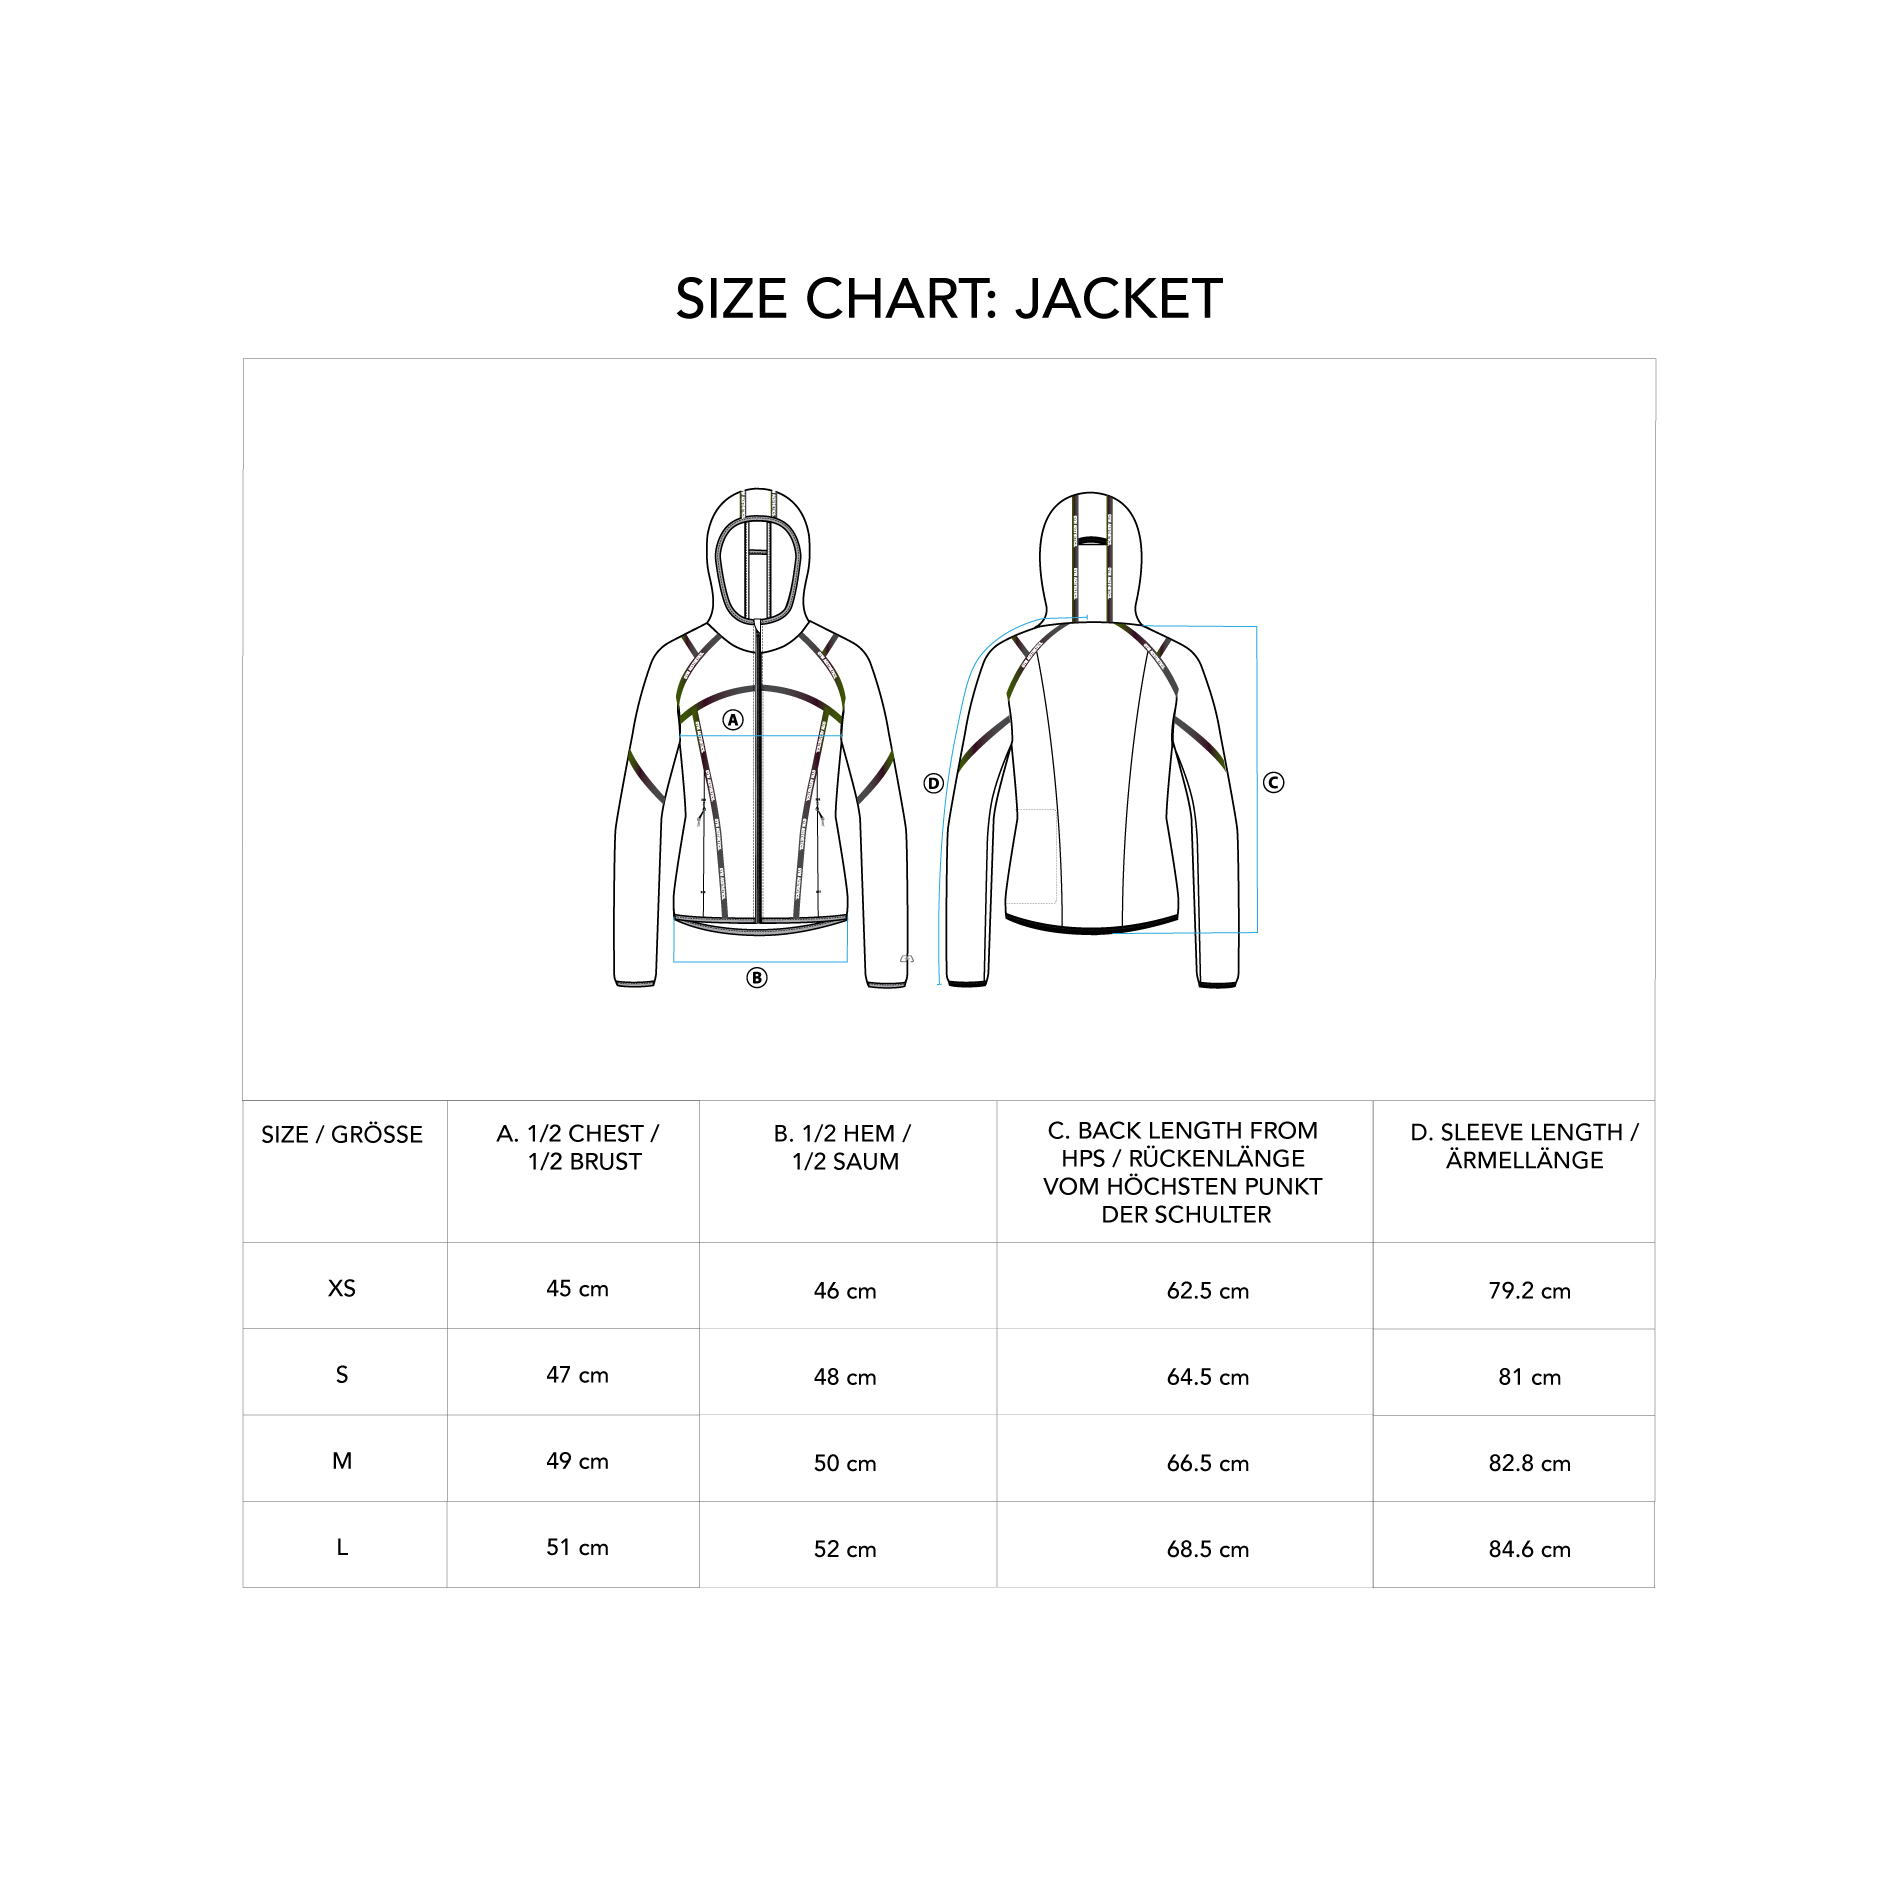 Athleisure Transparency Jacket for Women - size chart